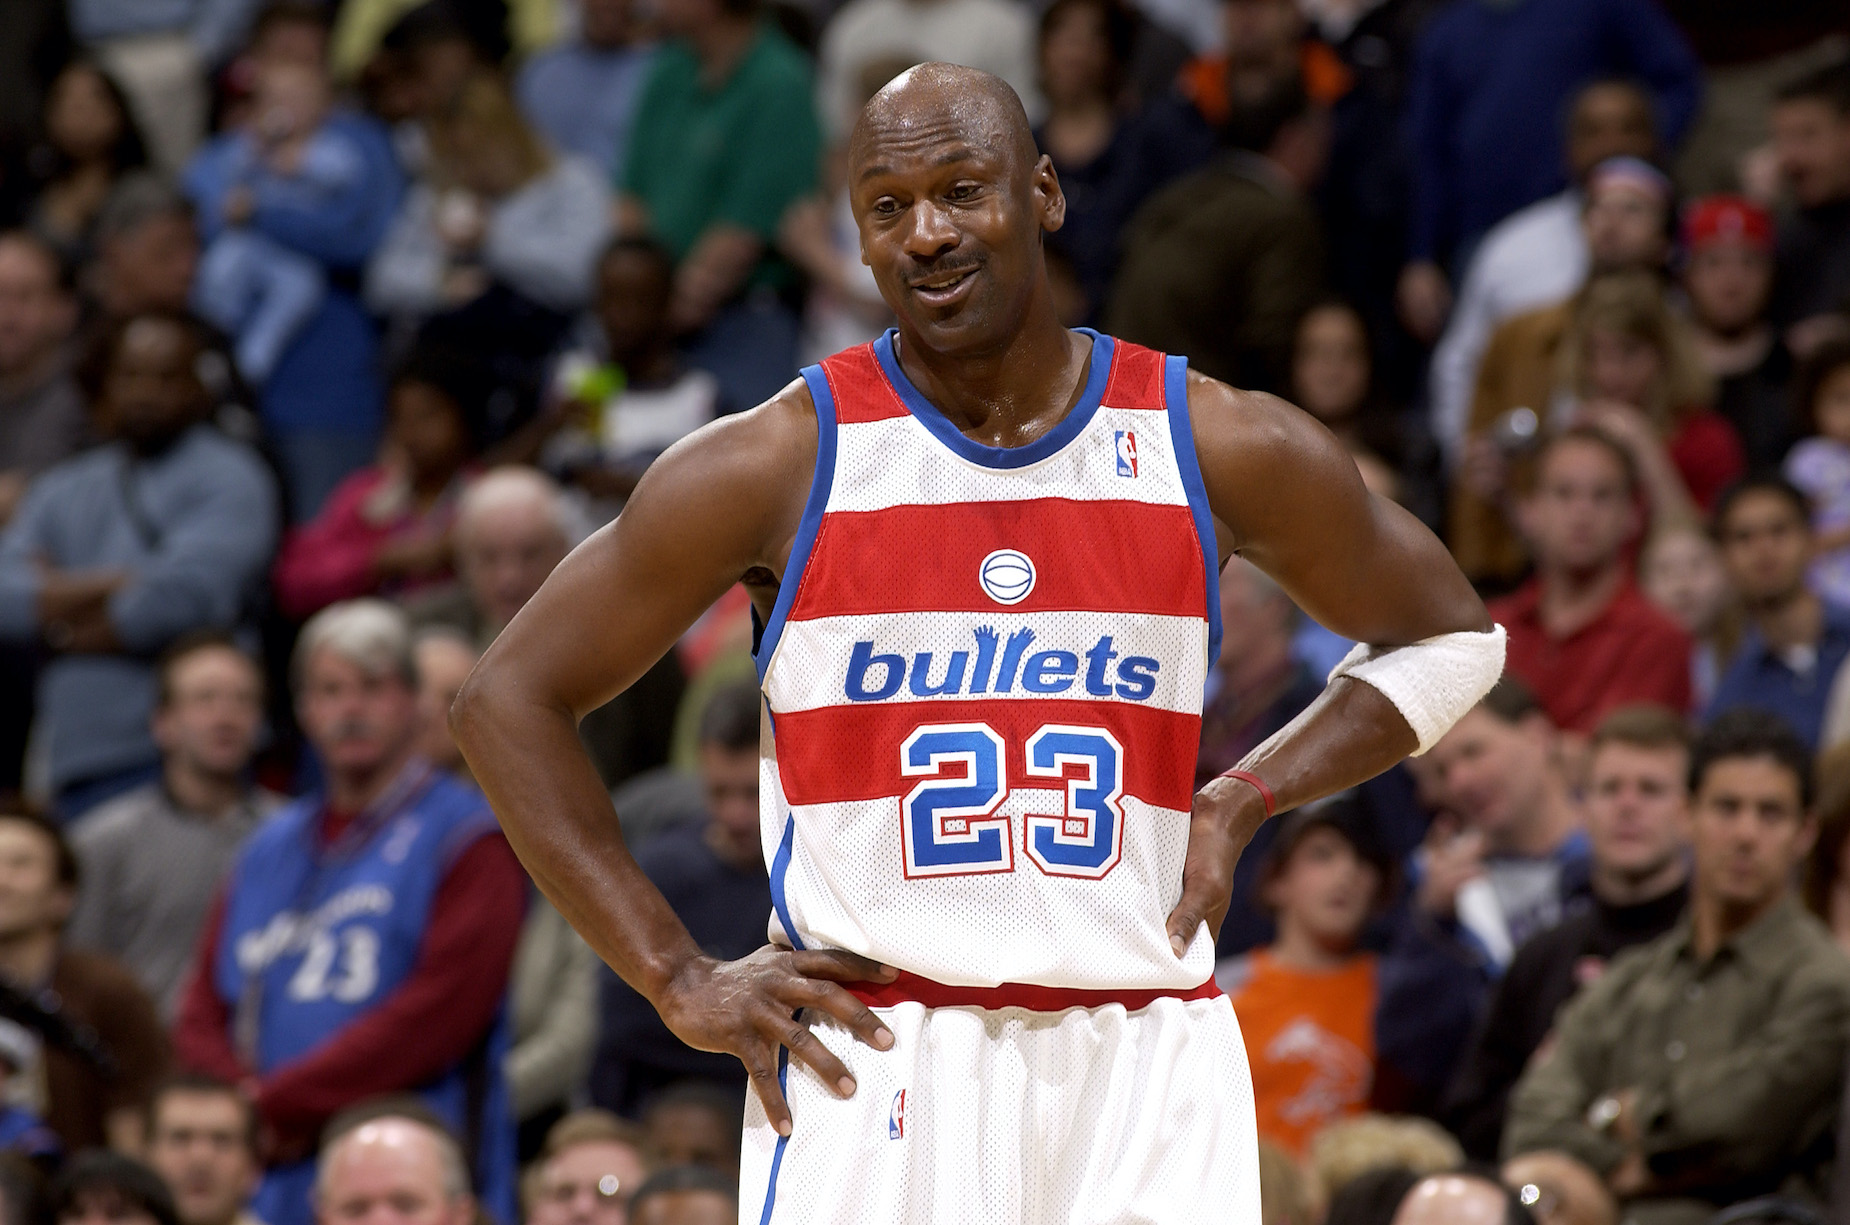 Michael Jordan Is Worth $1.6 But He Once Played an Entire NBA Season Without Pocketing a Single Dollar of Salary